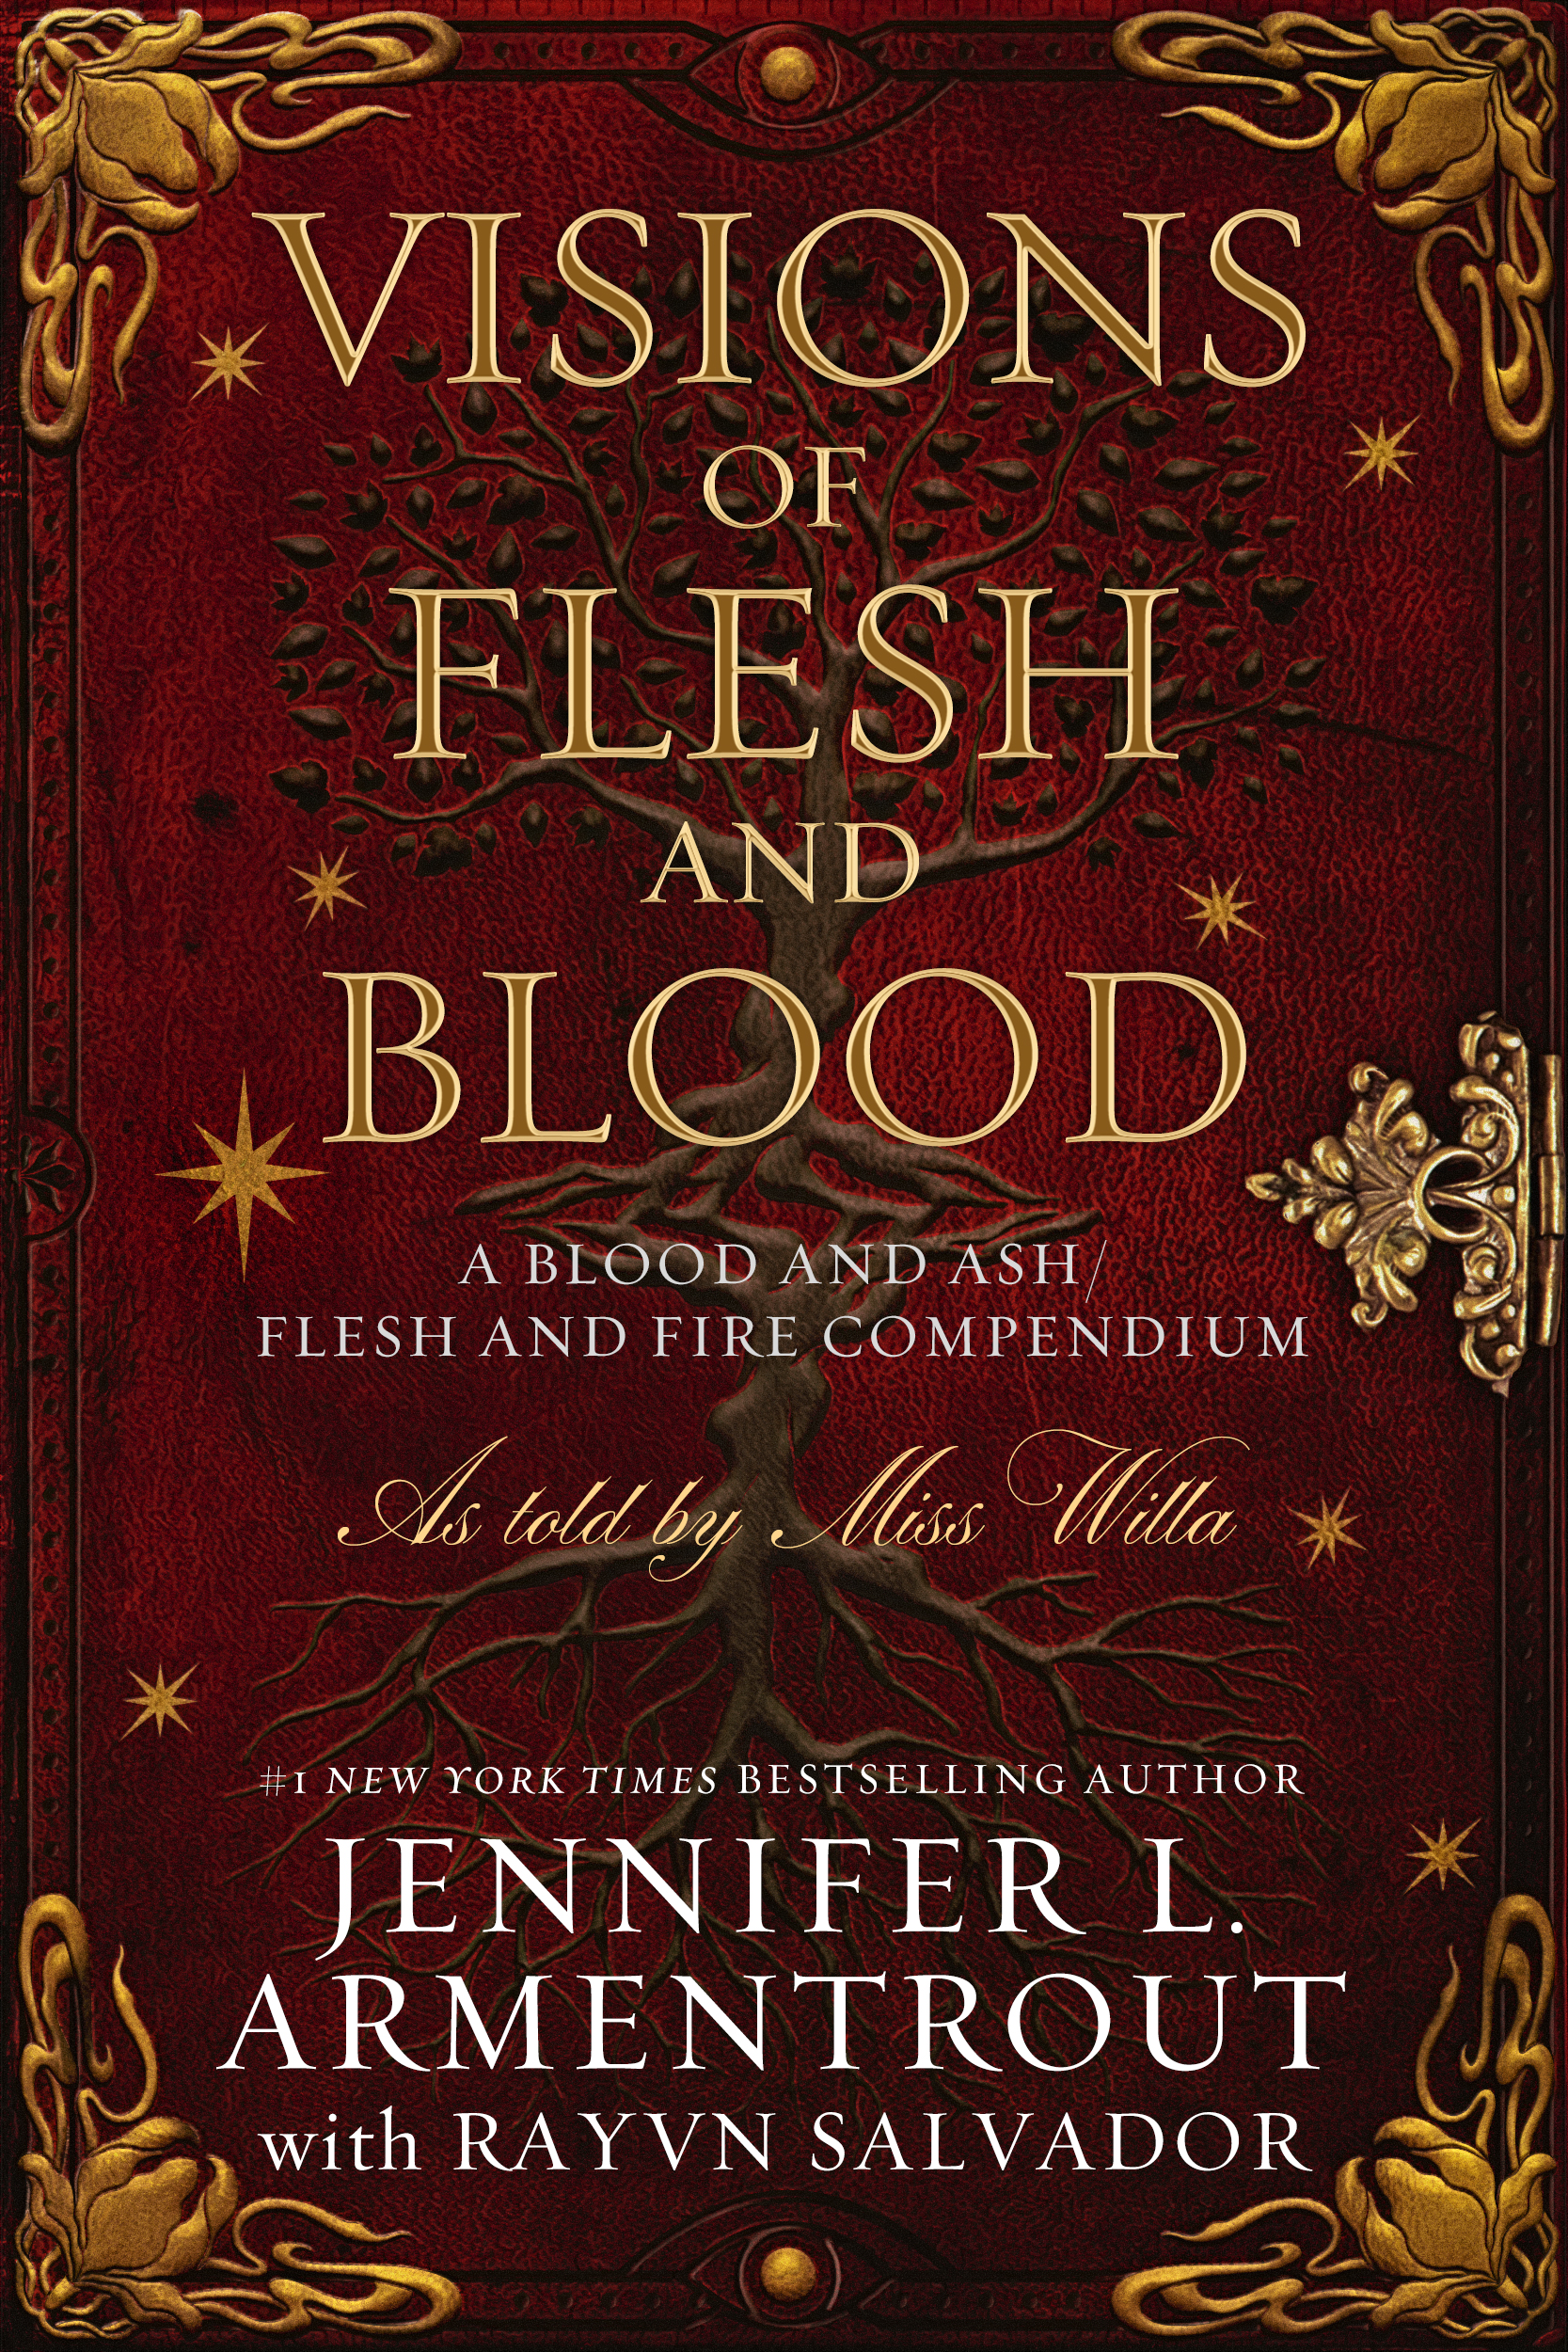 Visions of Flesh and Blood: A Blood and Ash/Flesh and Fire Compendium by Jennifer L. Armentrout, Rayvn Salvador